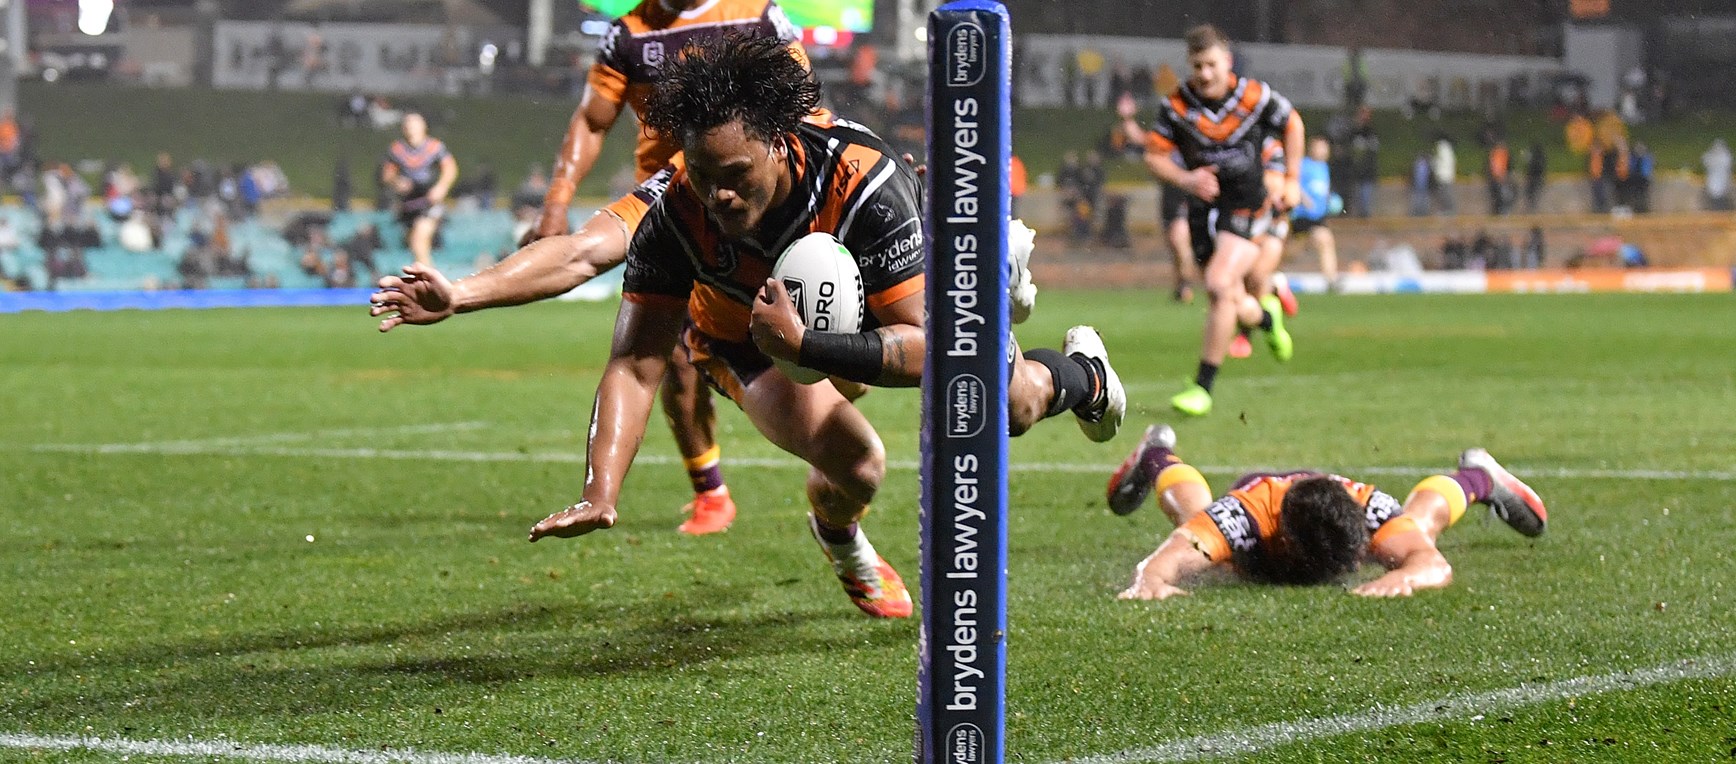 Best Wests Tigers photos of 2020